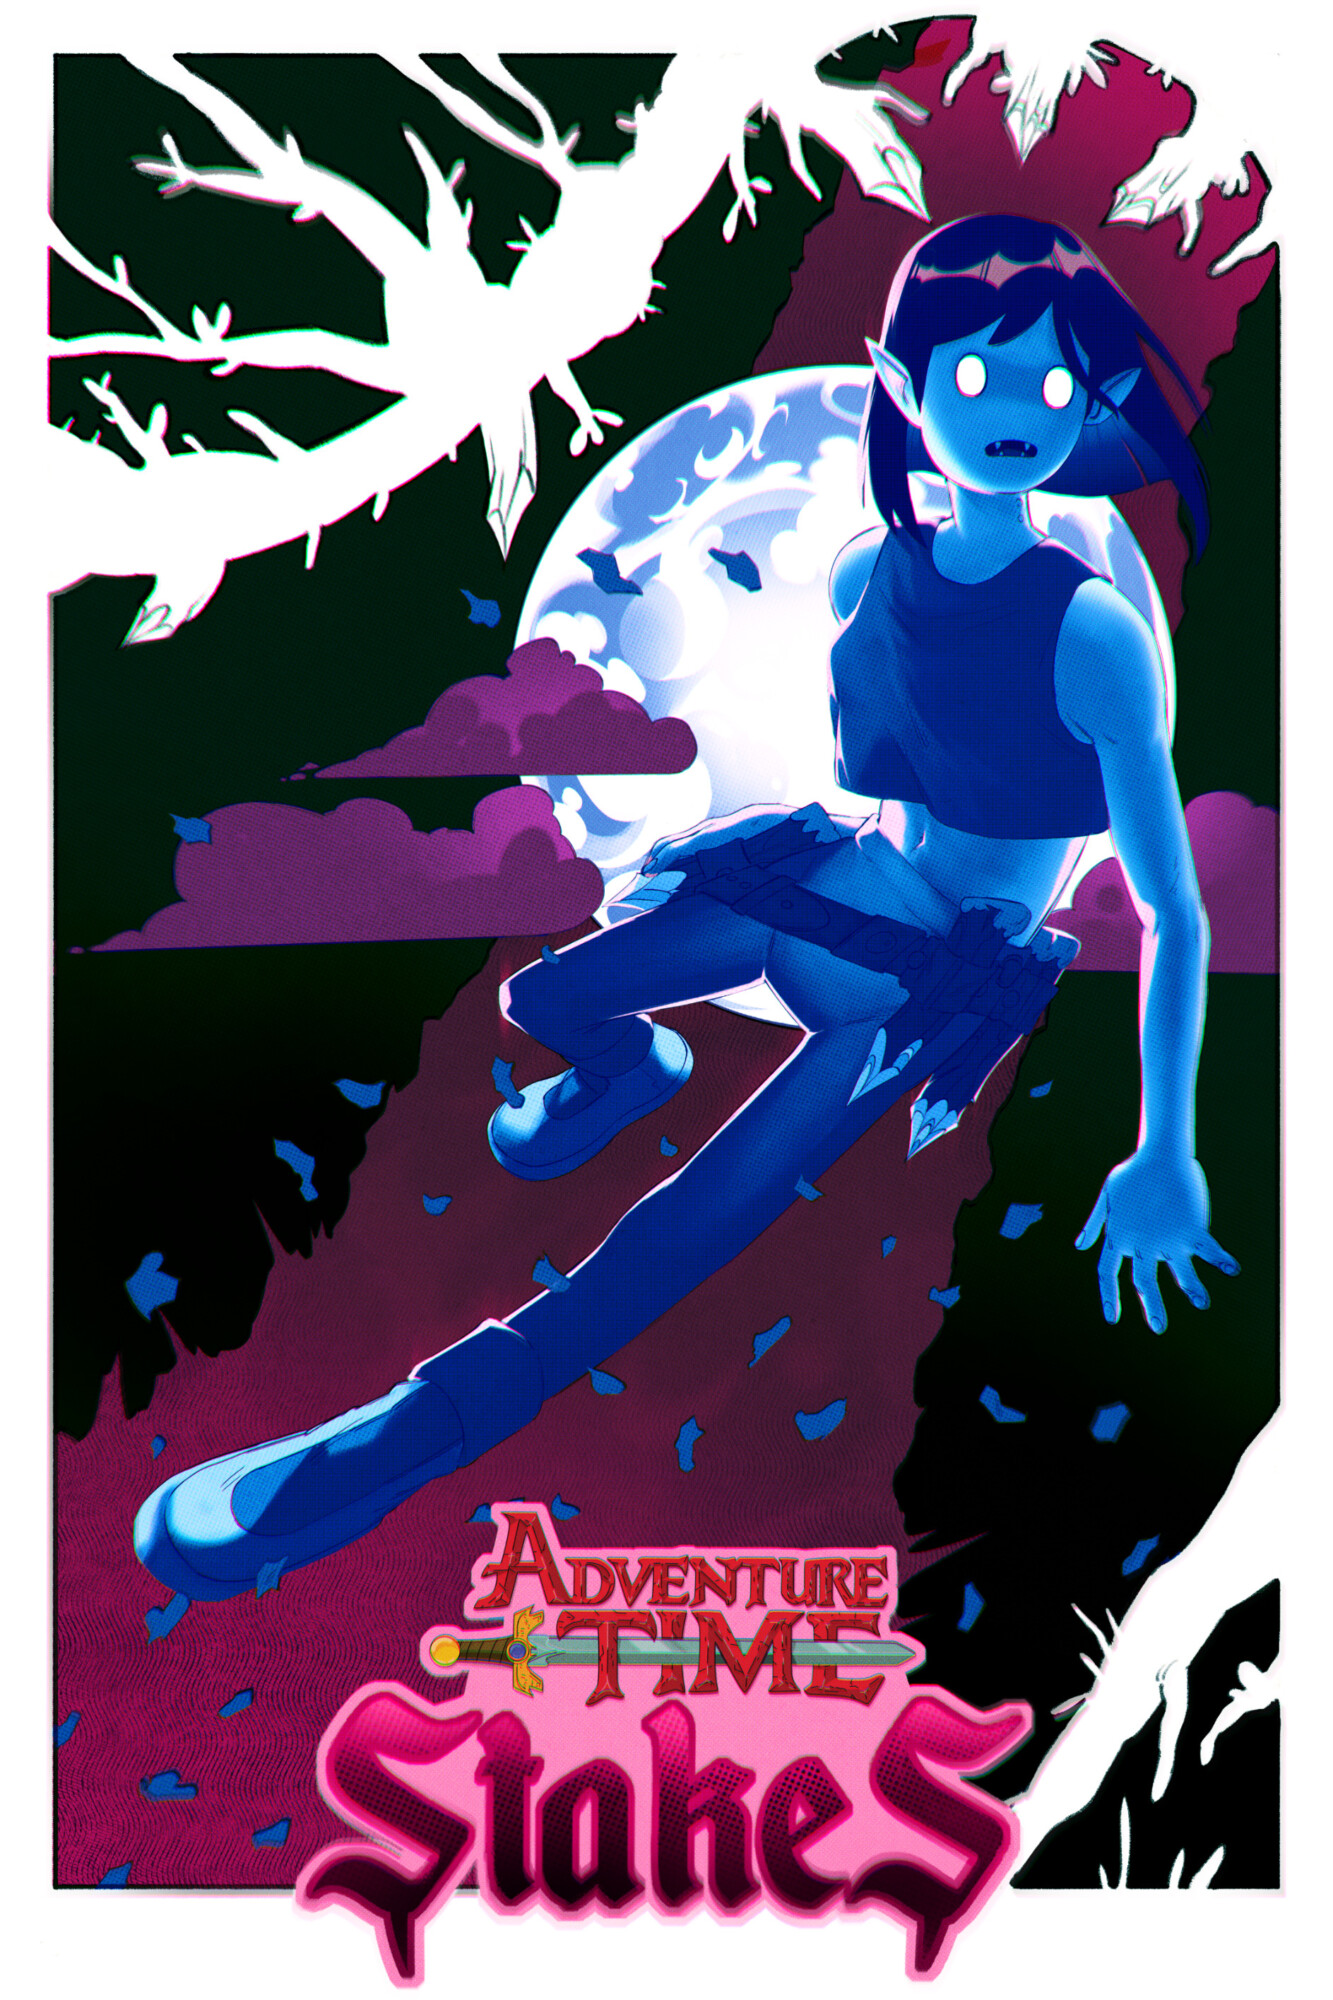 Adventure time Stakes – [FAN POSTER]